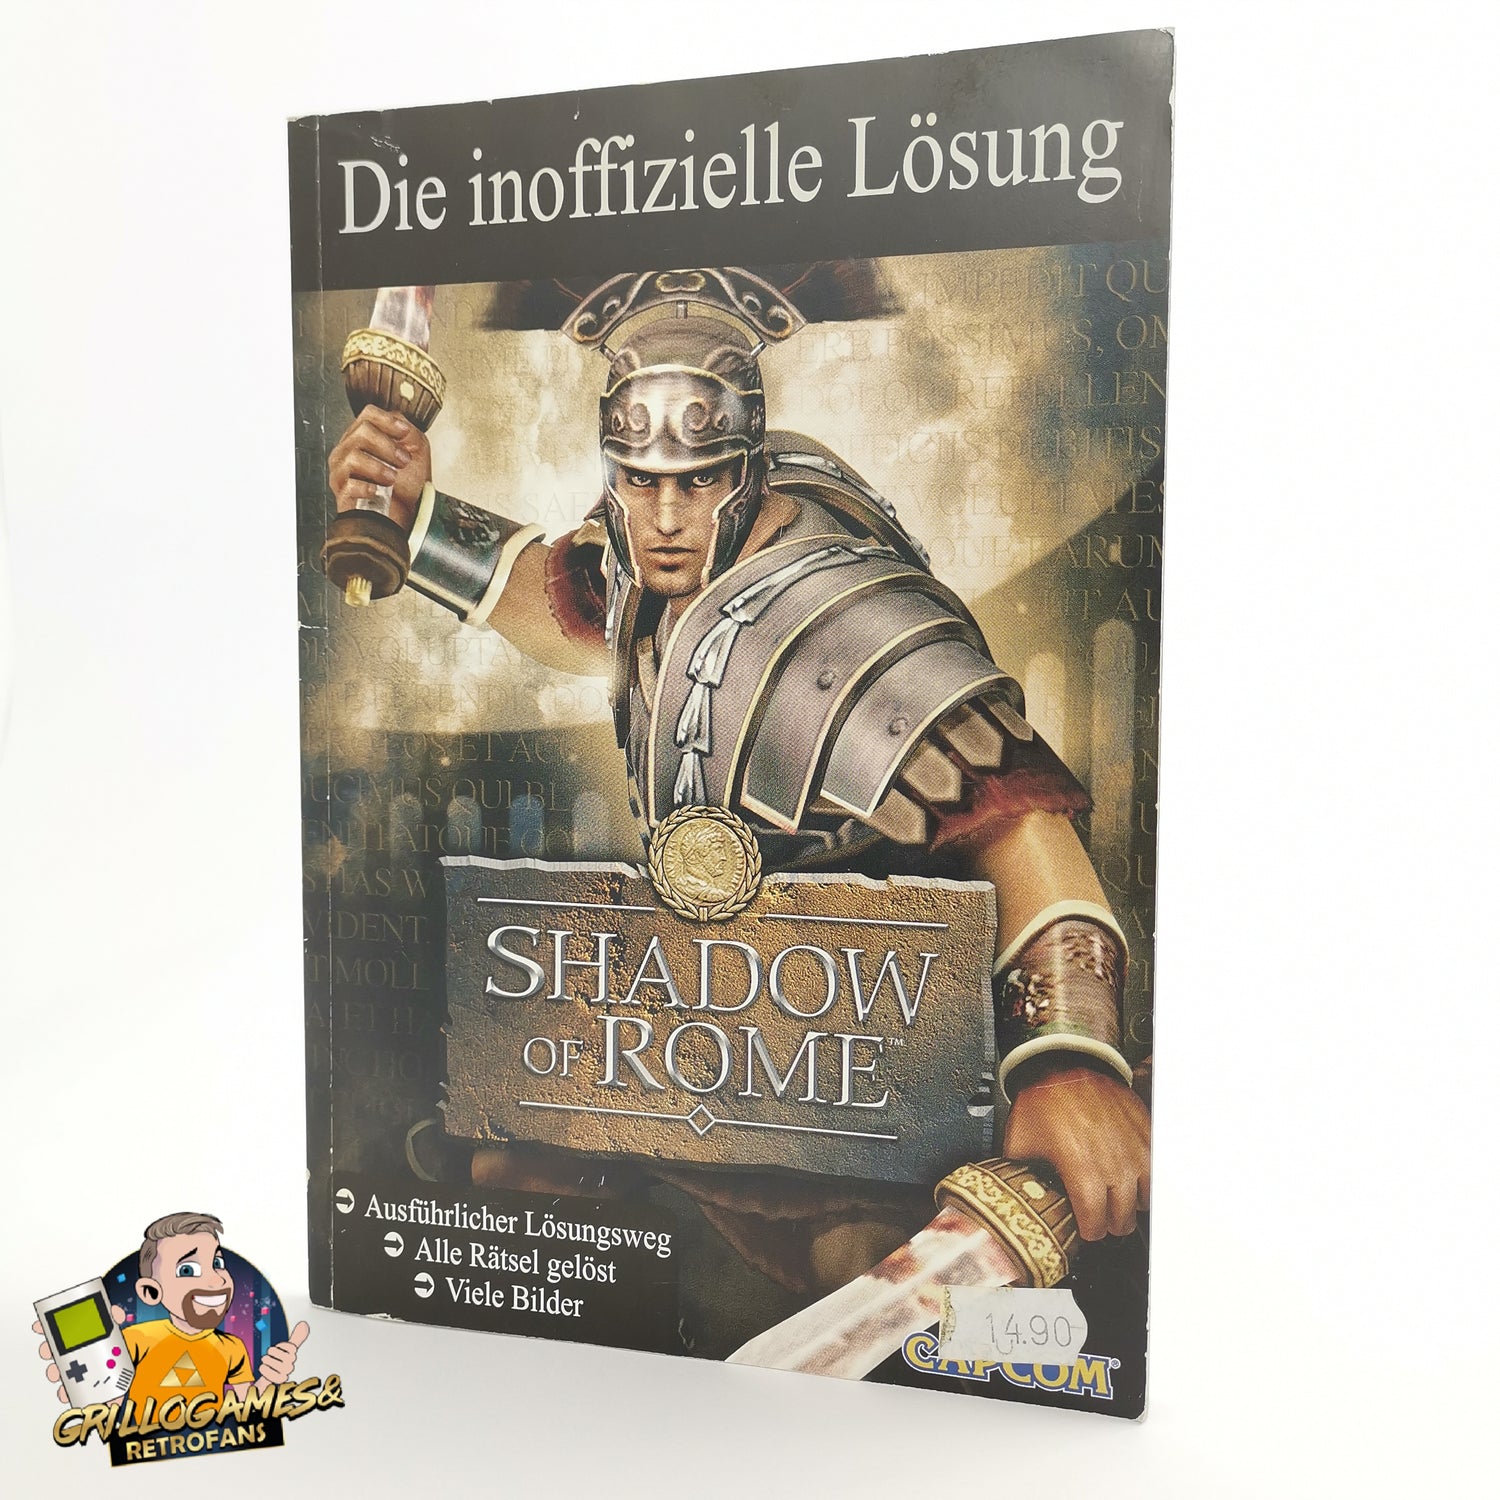 Sony Playstation Shadow of Rome The Unofficial Solution | Gaming consultant